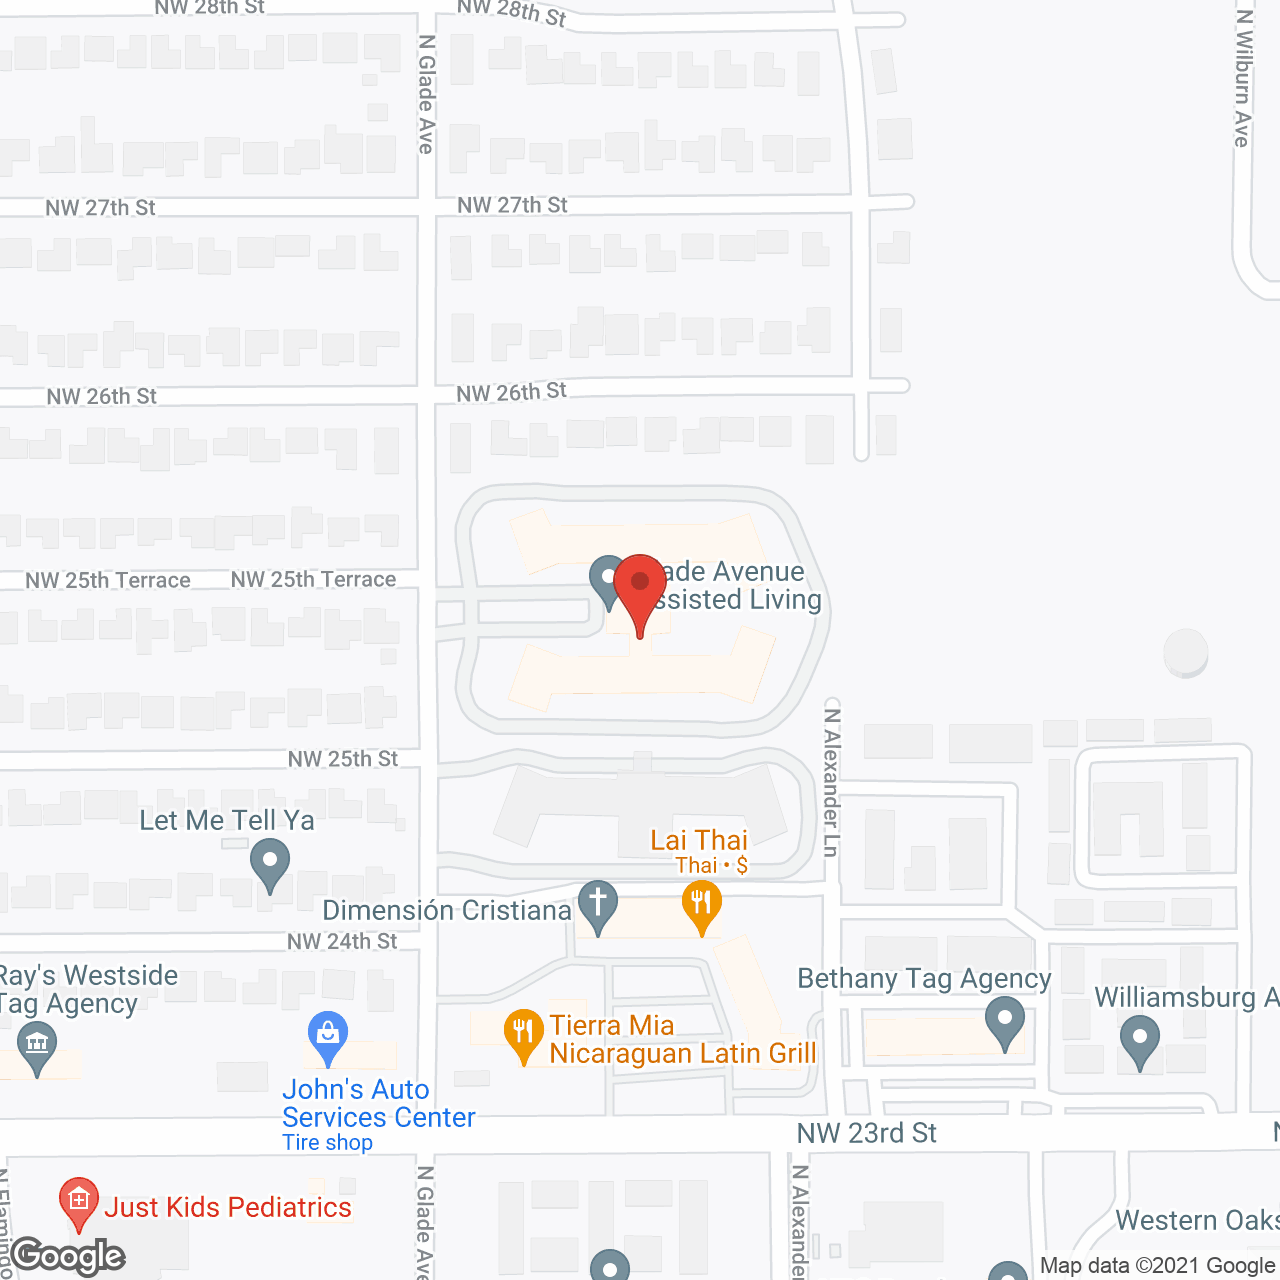 Glade Avenue Assisted Living in google map